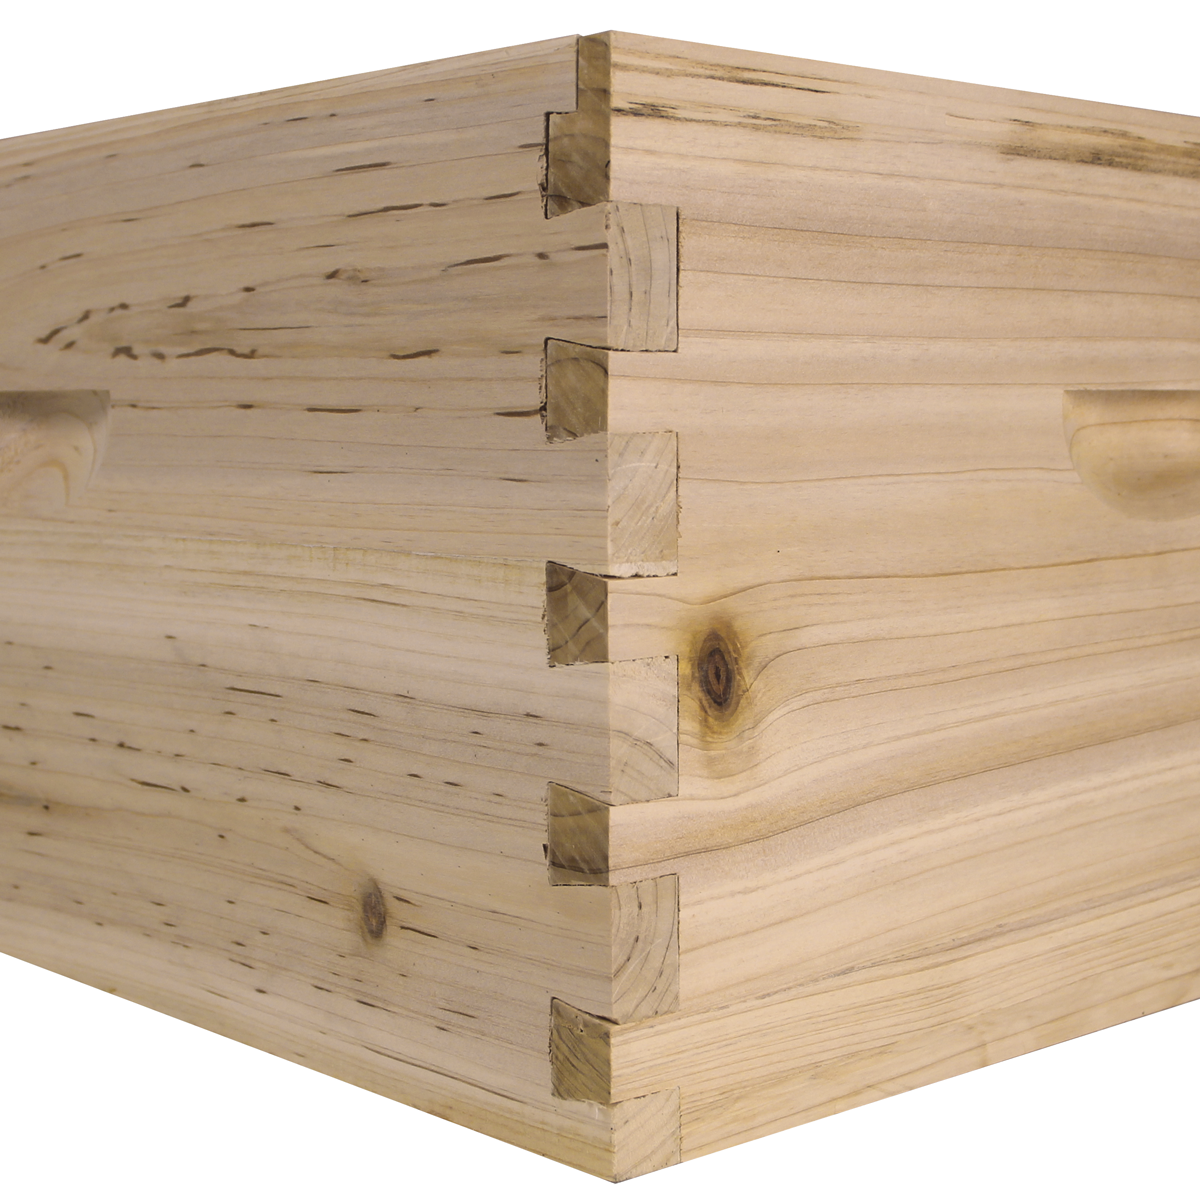 8 Frame Deep Brood Box w/ Dovetail Joints (Unassembled w/ Frames and Foundations)